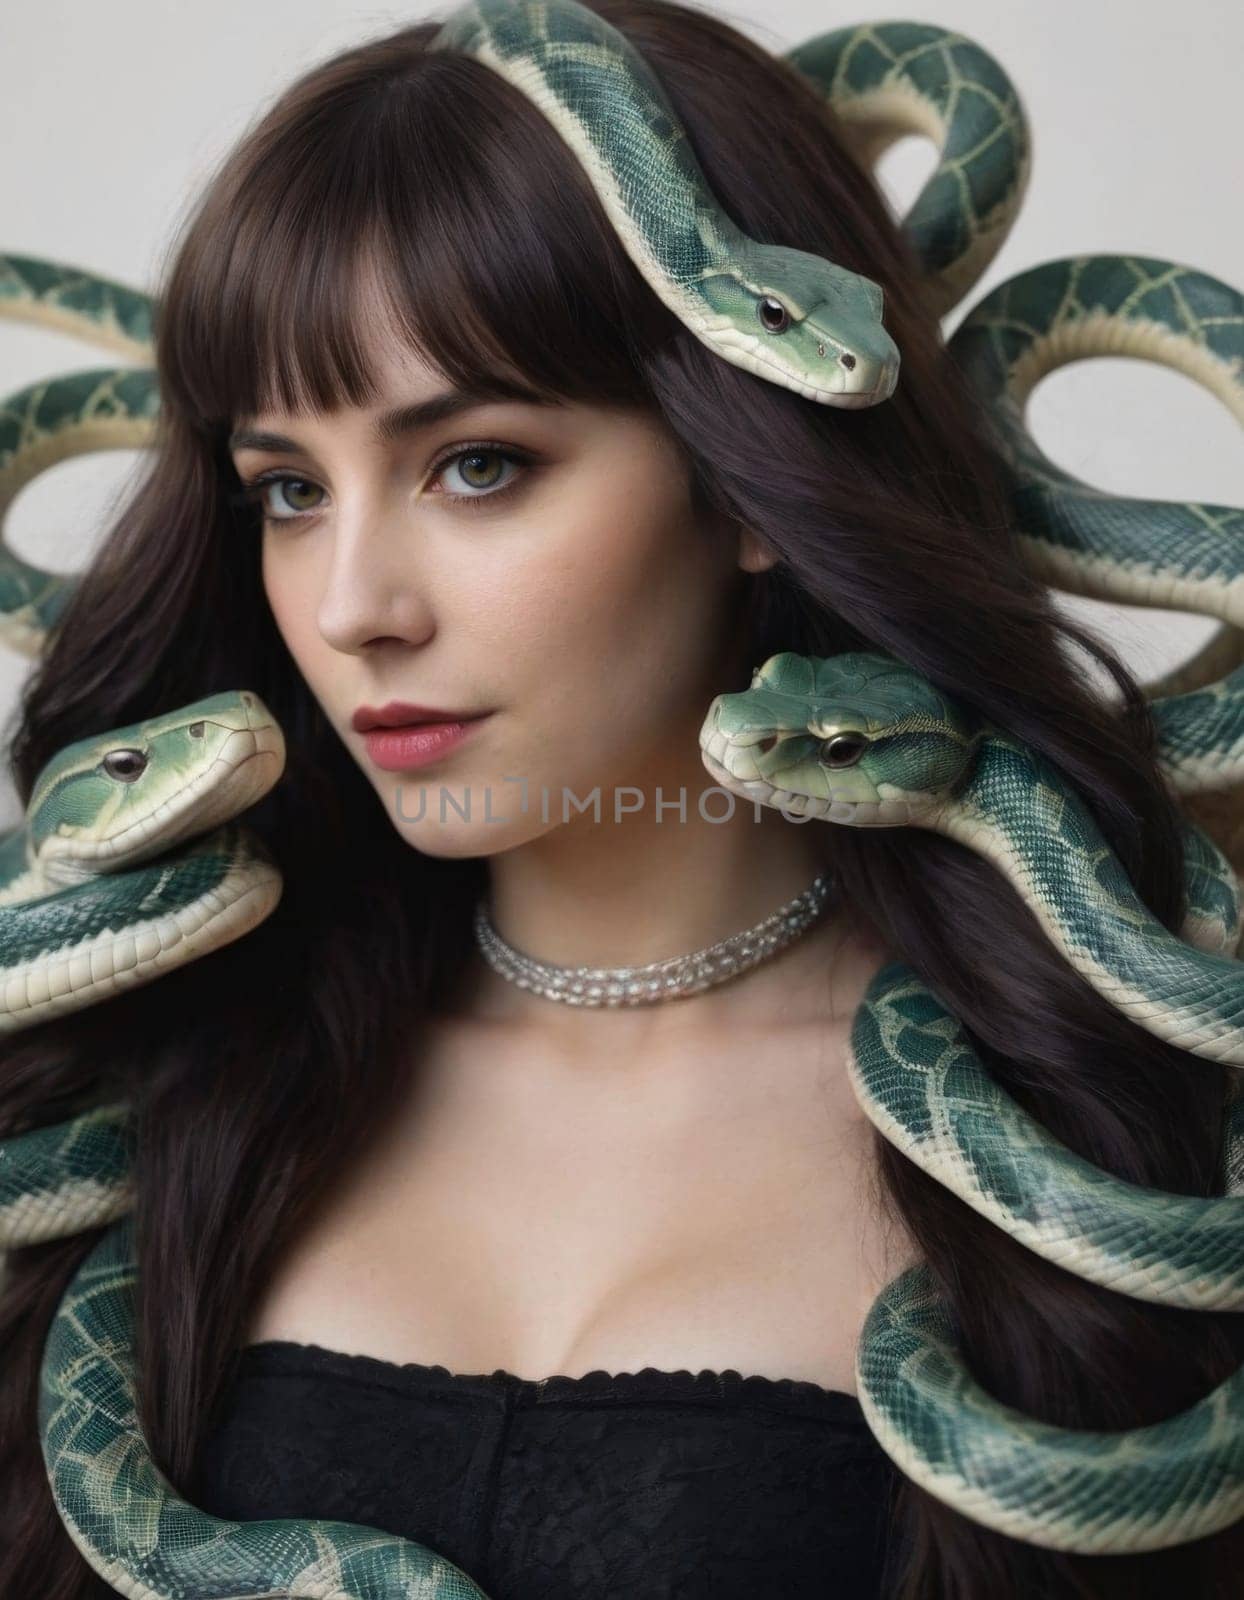 Brunette with snakes in her hair. by vicnt